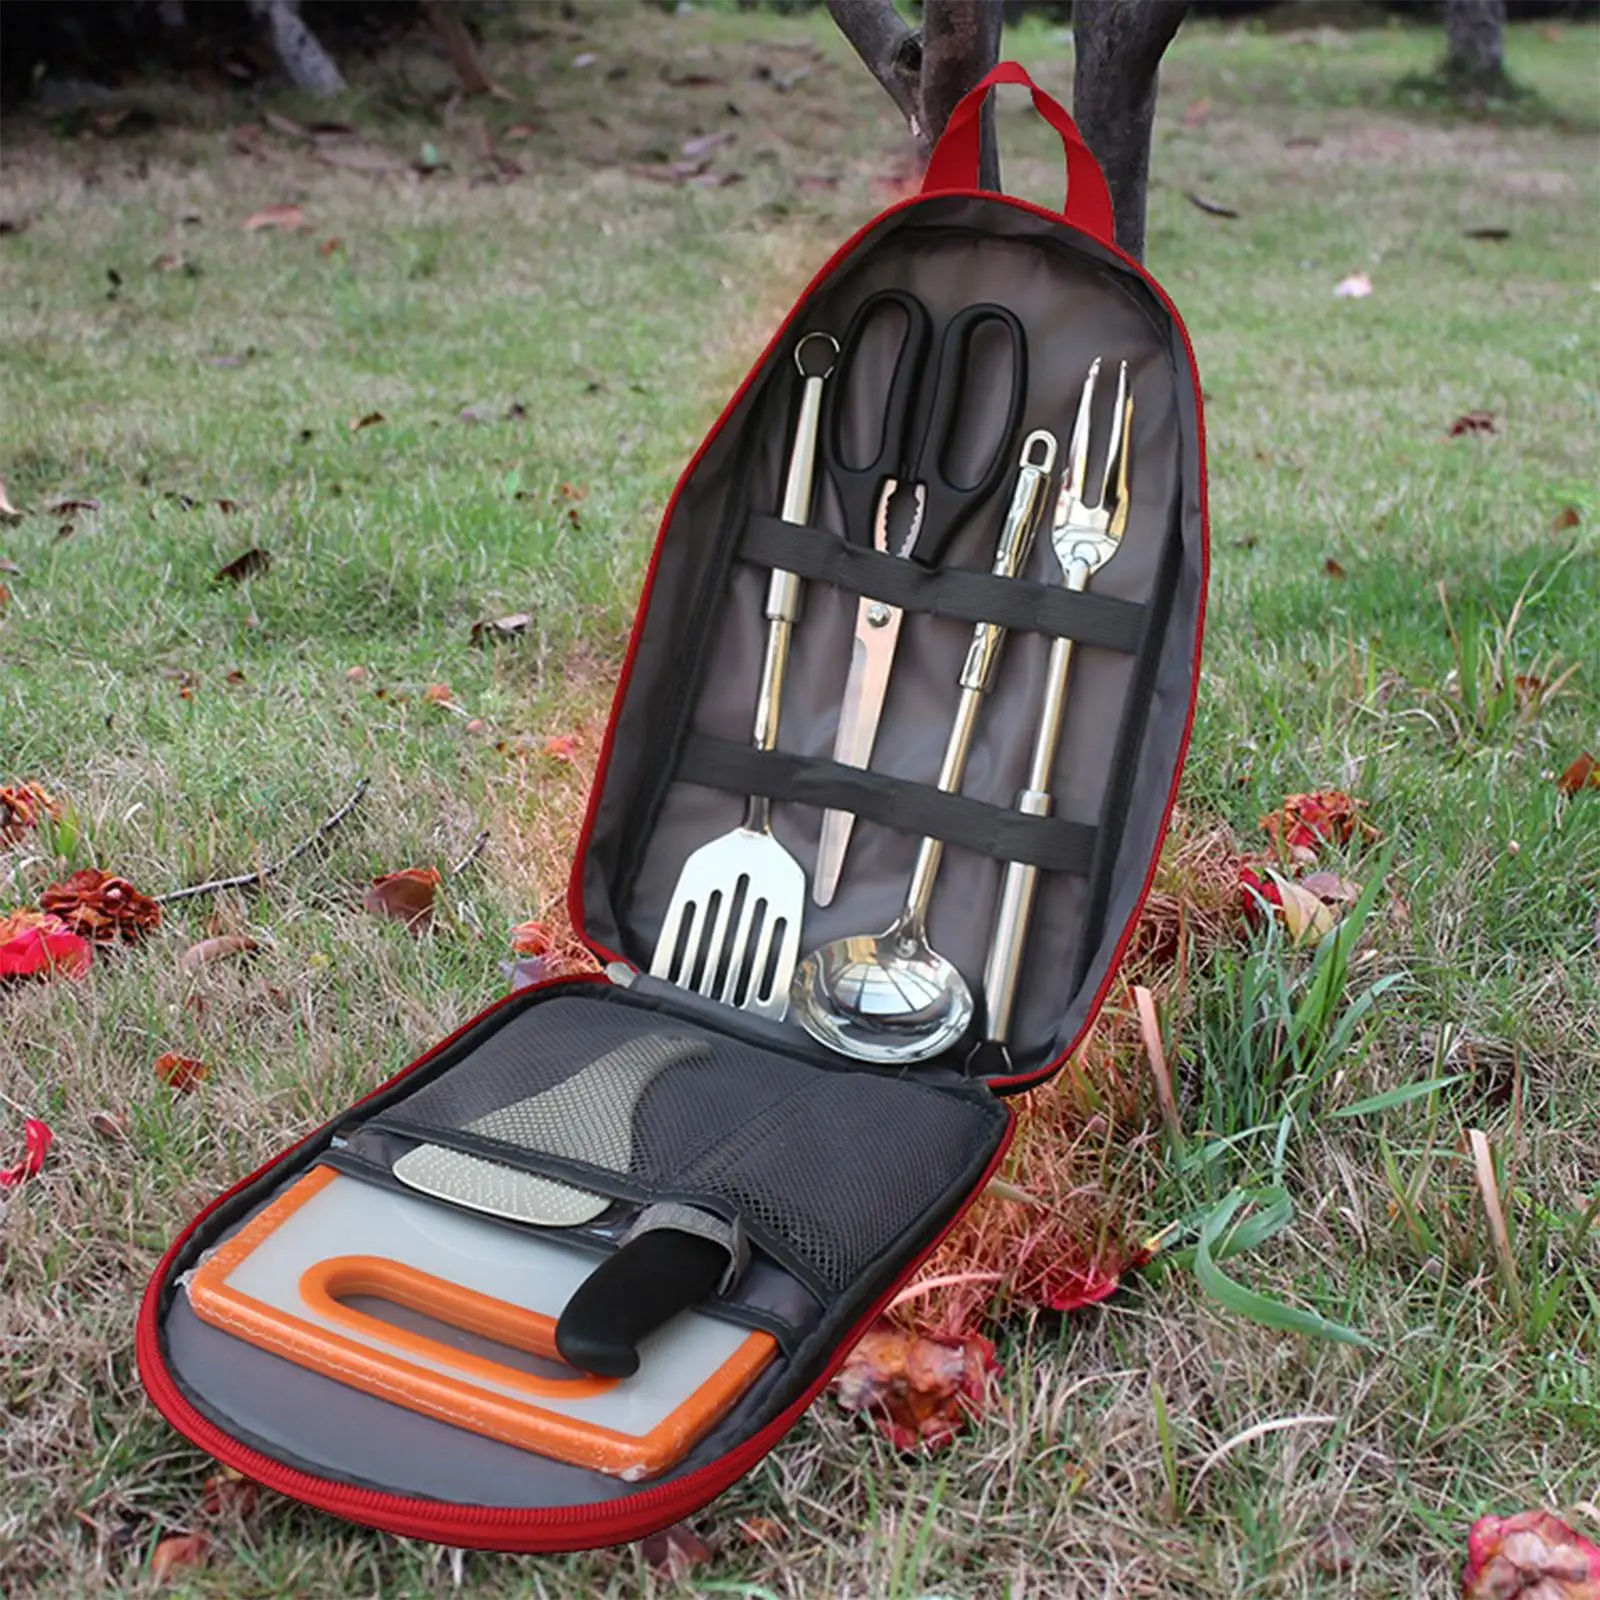 7 Pieces Camping Cooking Utensils Set with Carrying Bag Portable Gear Camp Kitchen Equipment for RV Picnic BBQ Grilling Gadgets